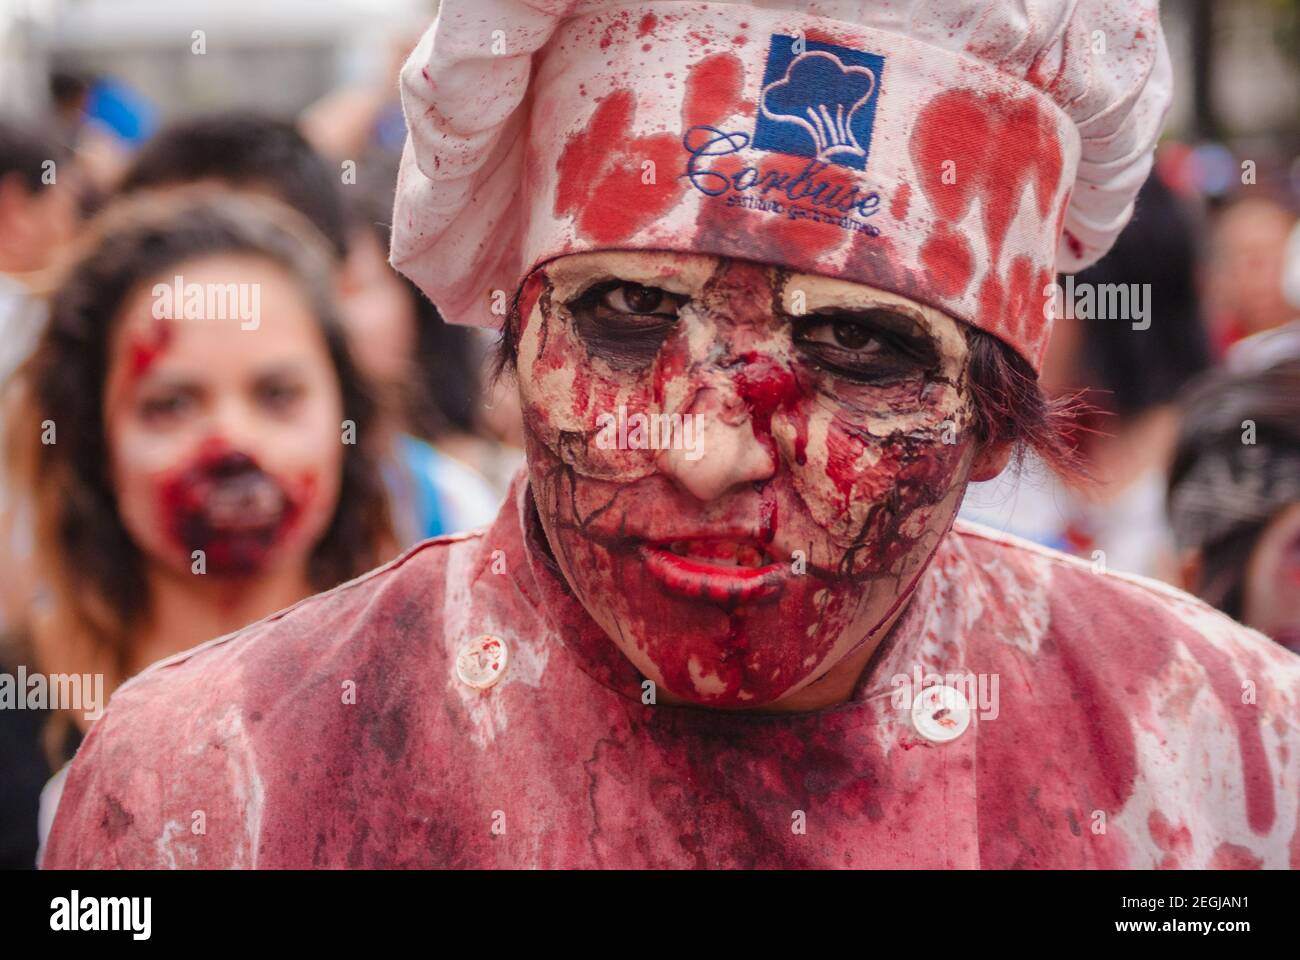 The zombie march takes place, a family event that encourages non-discrimination and tolerance. Stock Photo